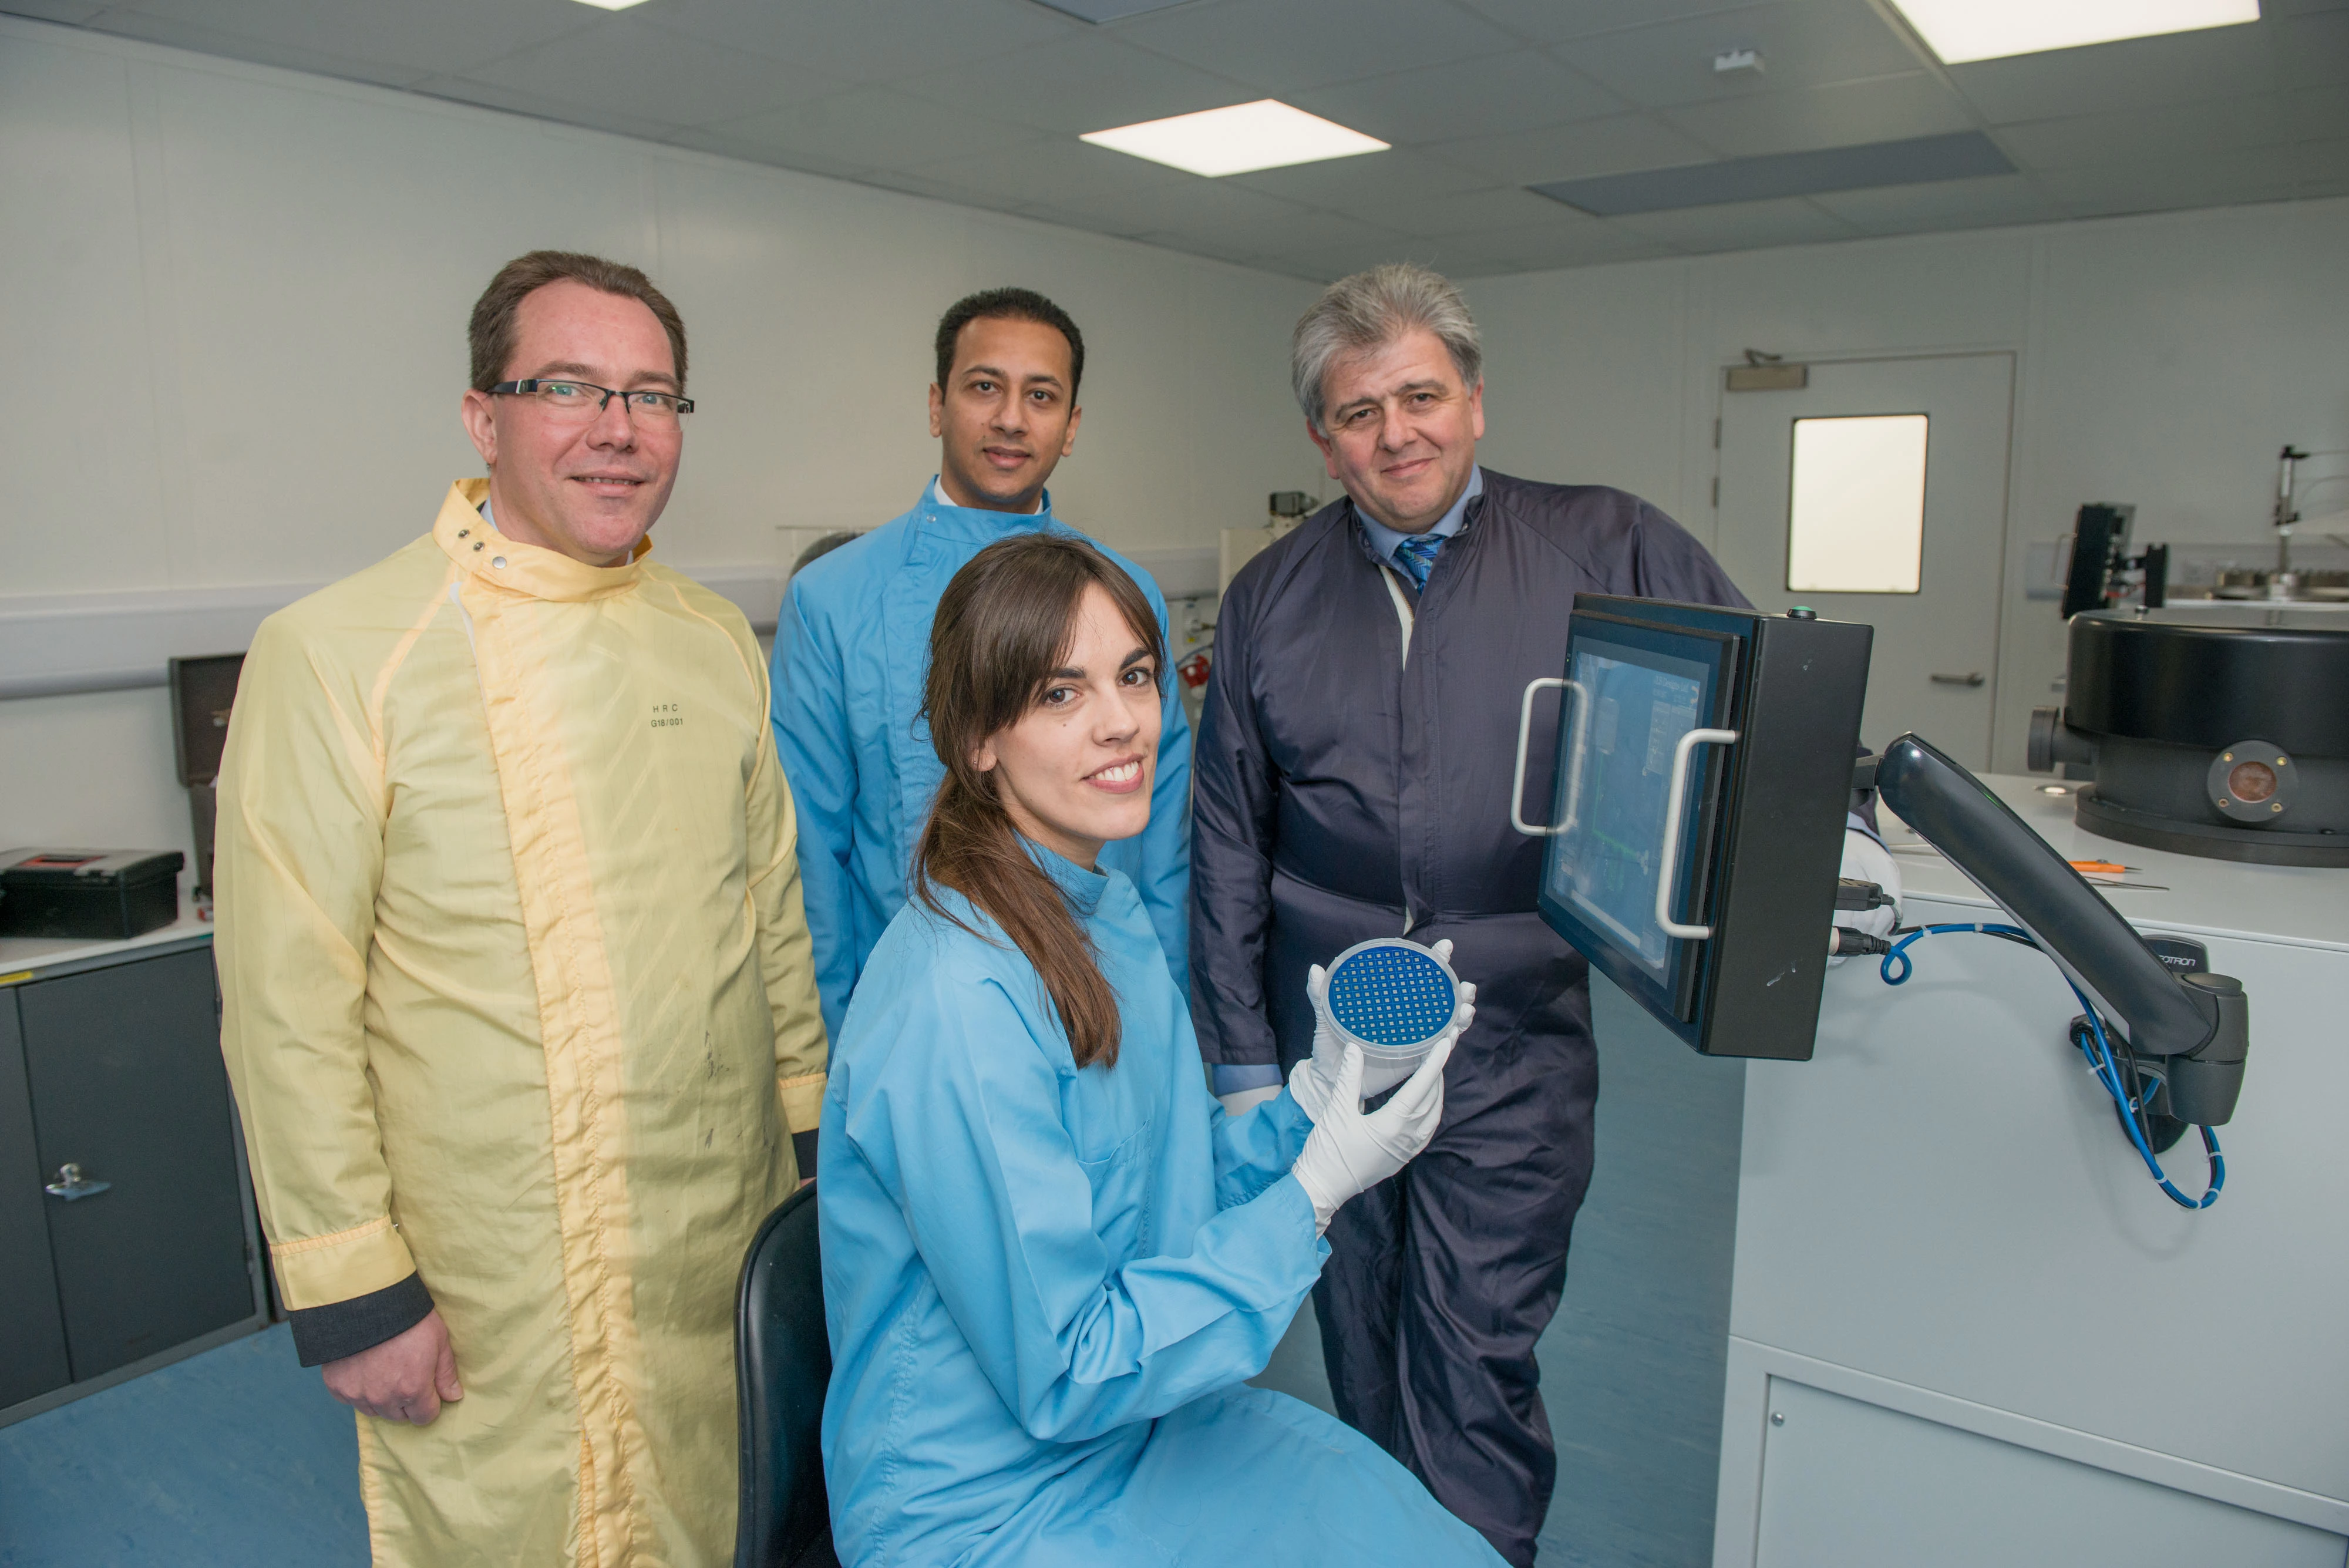 Pictured (left to right): Dirk Schafer, Noshad Khowaja, Peter Anastasi, with  research assistant Carmen Sánchez de Rojas Candela